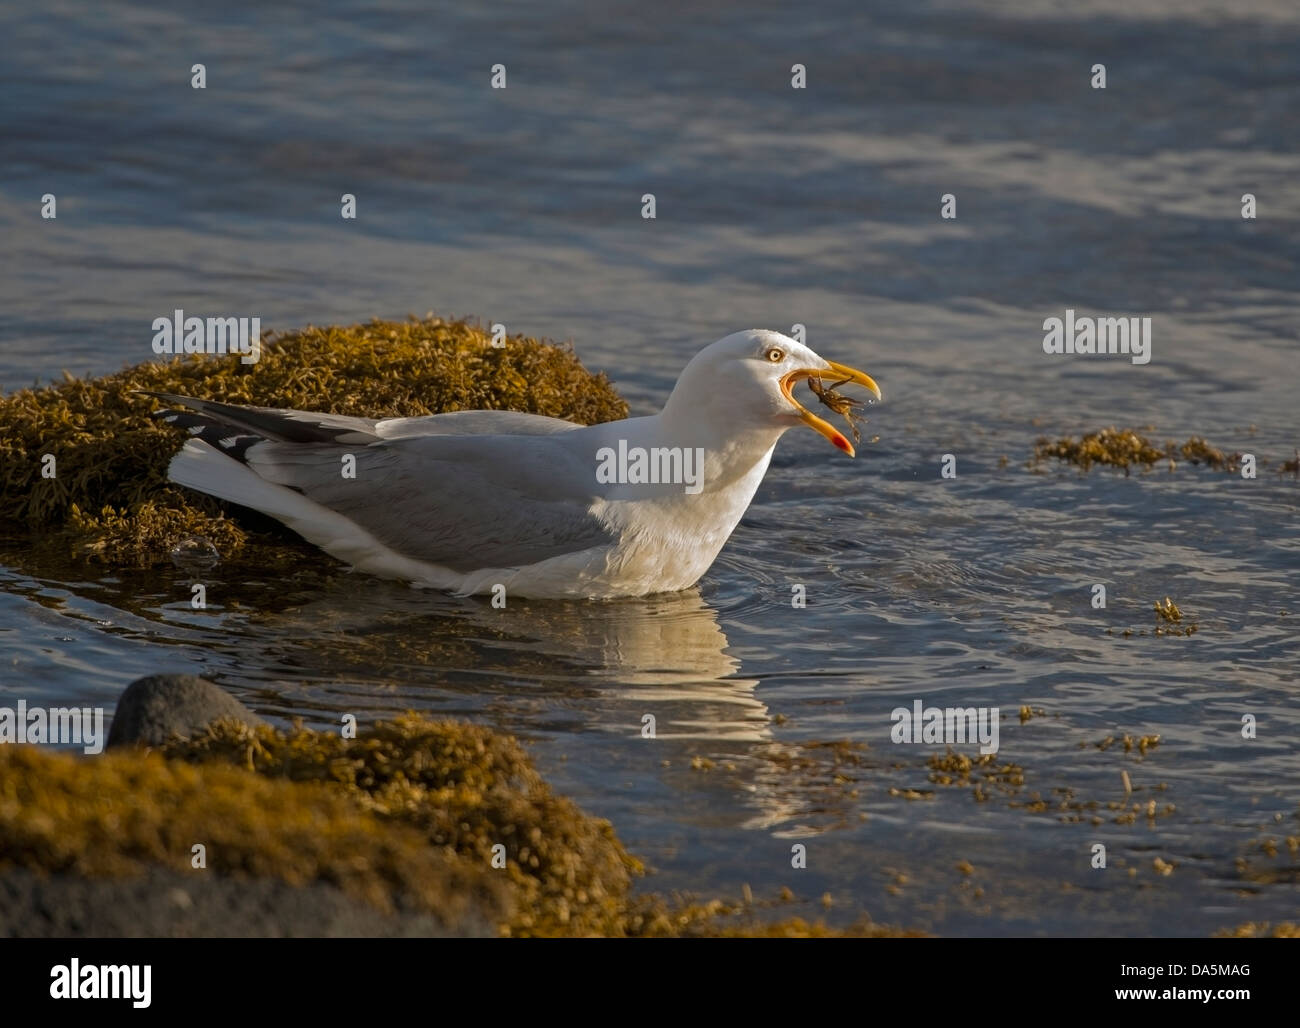 Early morning on Loch na Keal in the Isle of Mull, and this gull has himself an early bite. Stock Photo